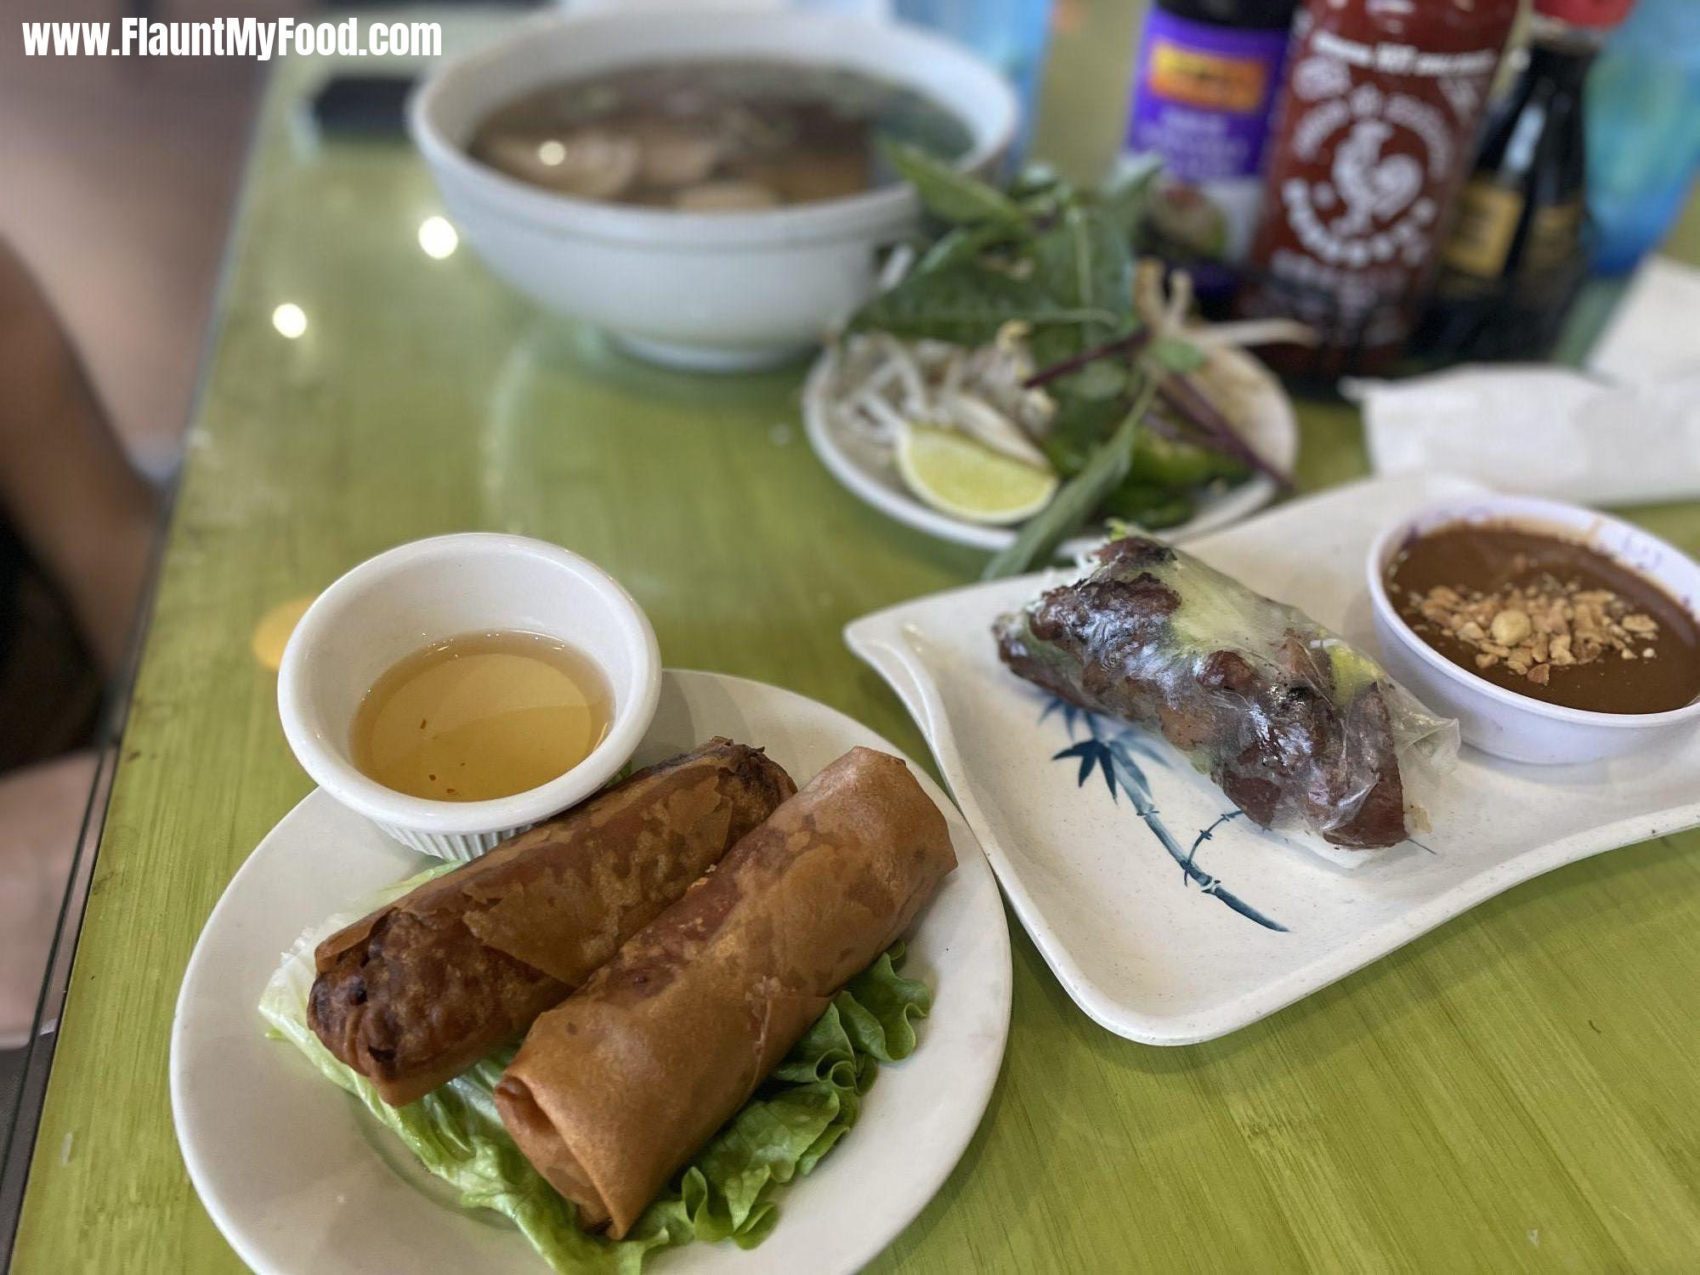 Authentic pho cuisineEnjoying grilled pork rolls, fried eggrolls, chicken pho. Delicious! our favorite restaurant pho and grill in Fort Worth Texas